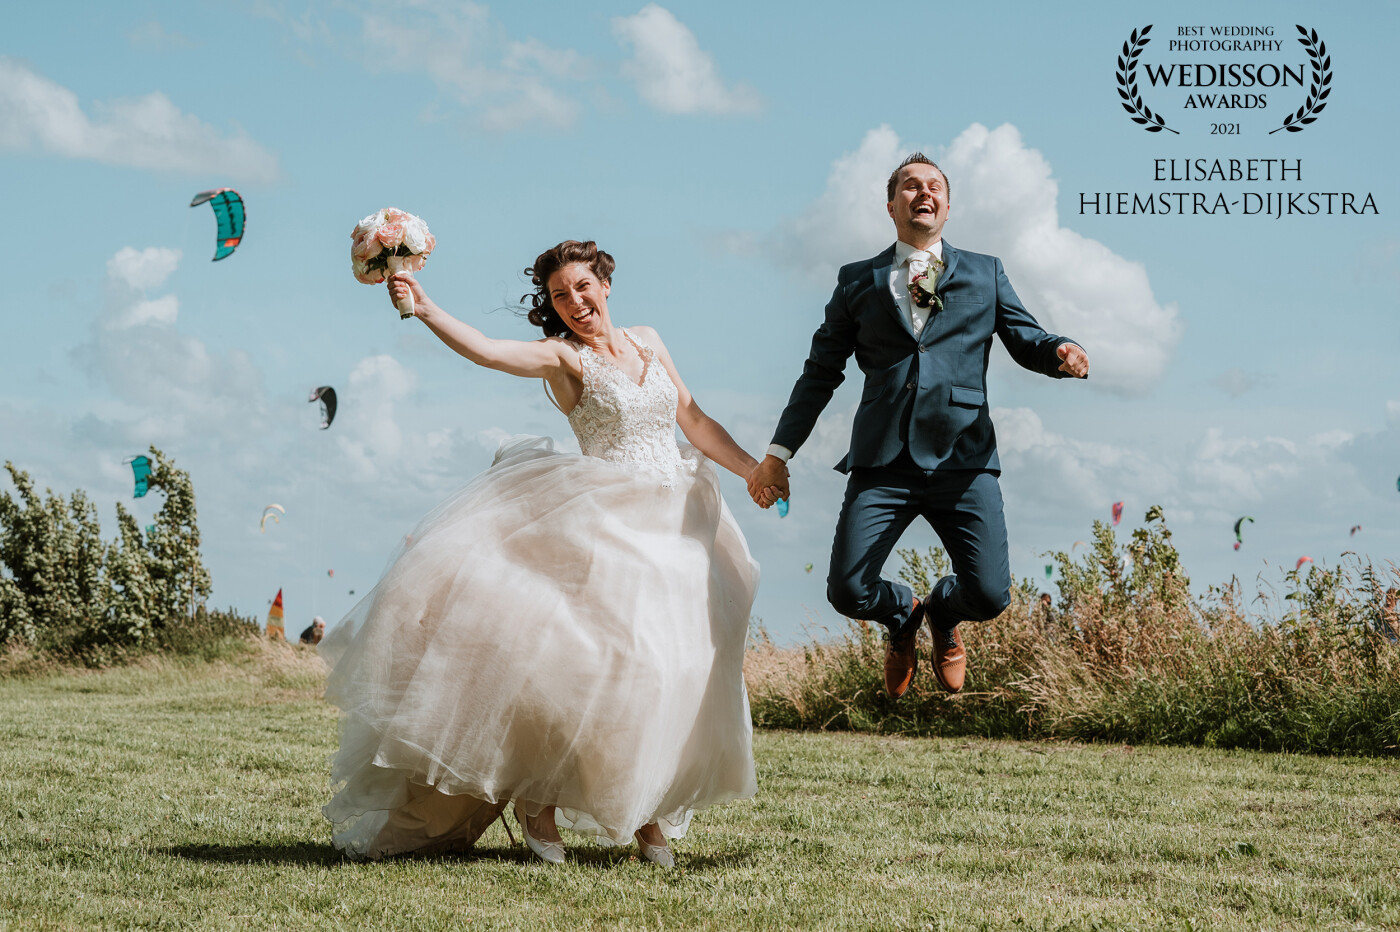 This couple was so happy they could celebrate there love! During covid-19 everything was so insecure. <br />
Both the bride and groom are blown away by the wind!